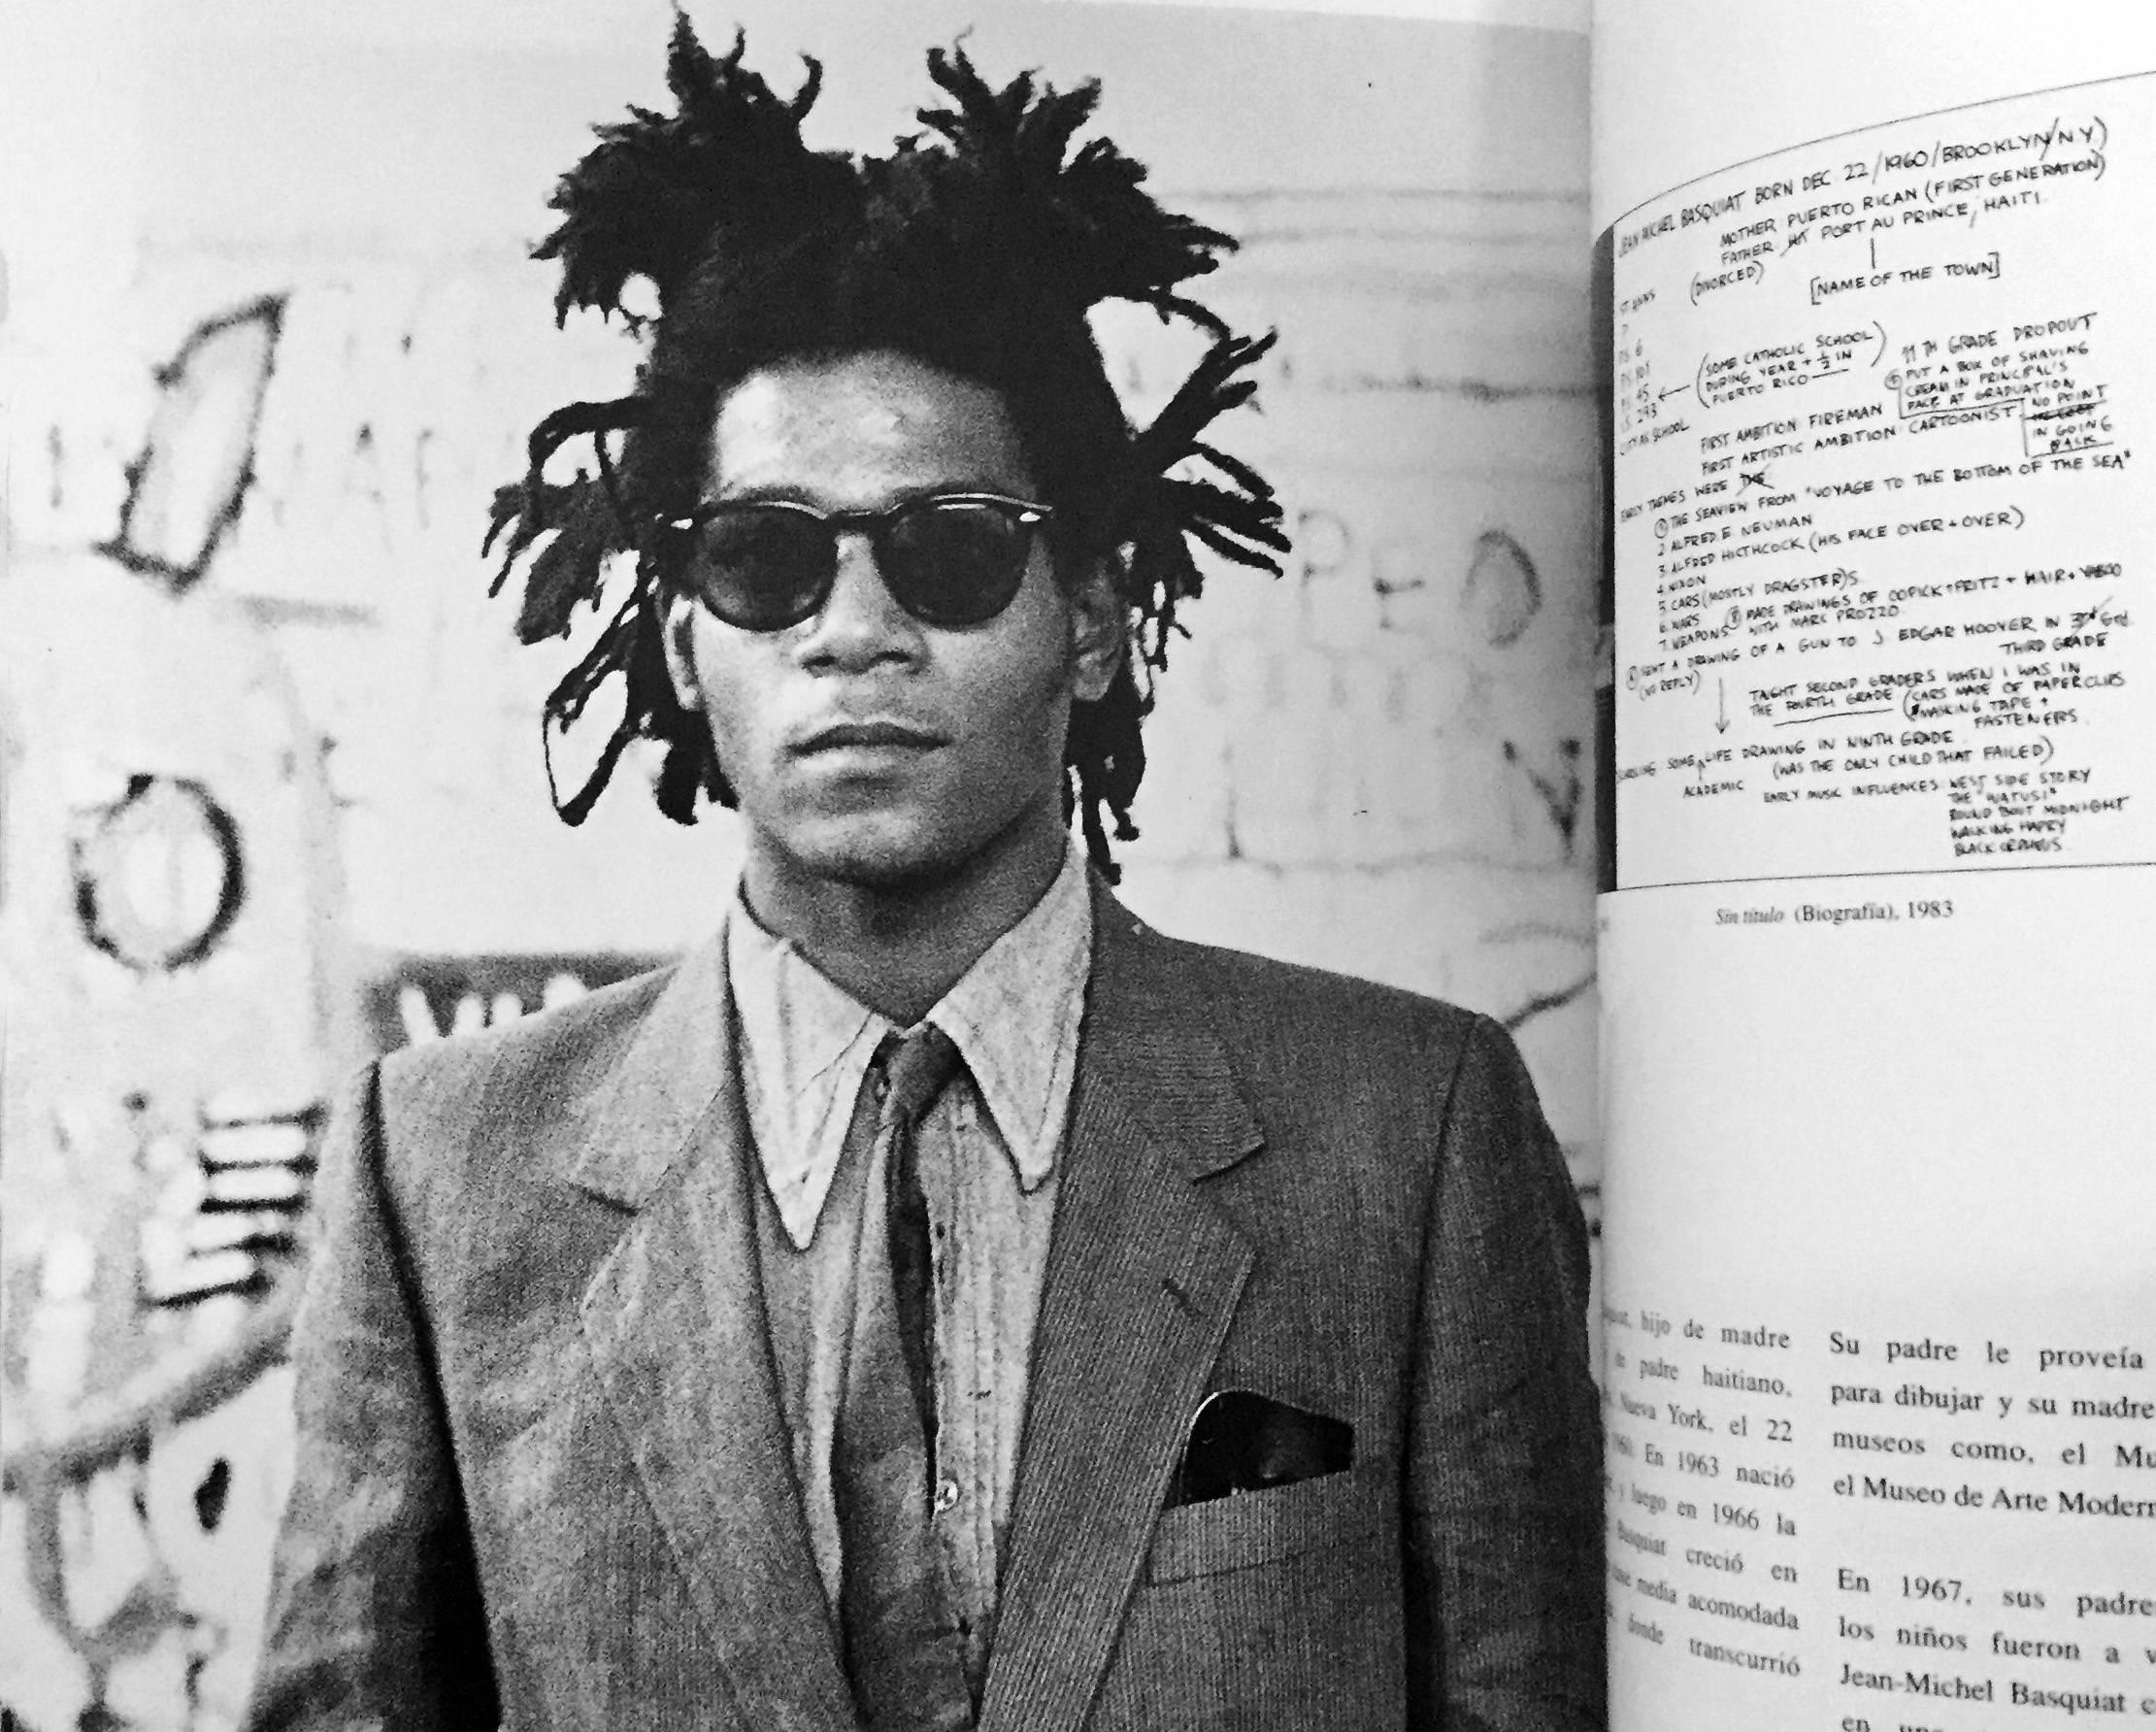 Jean-Michel Basquiat, Works on Paper: Catalog to the 1997 exhibit at the 
Museu Nacional de Bellas Artes, Buenos Aires, Argentina

Illustrated cover with flaps, 128 pages 9.5 x 12 inches (30 x 24 cm). Approximately 75 color reproductions as well as